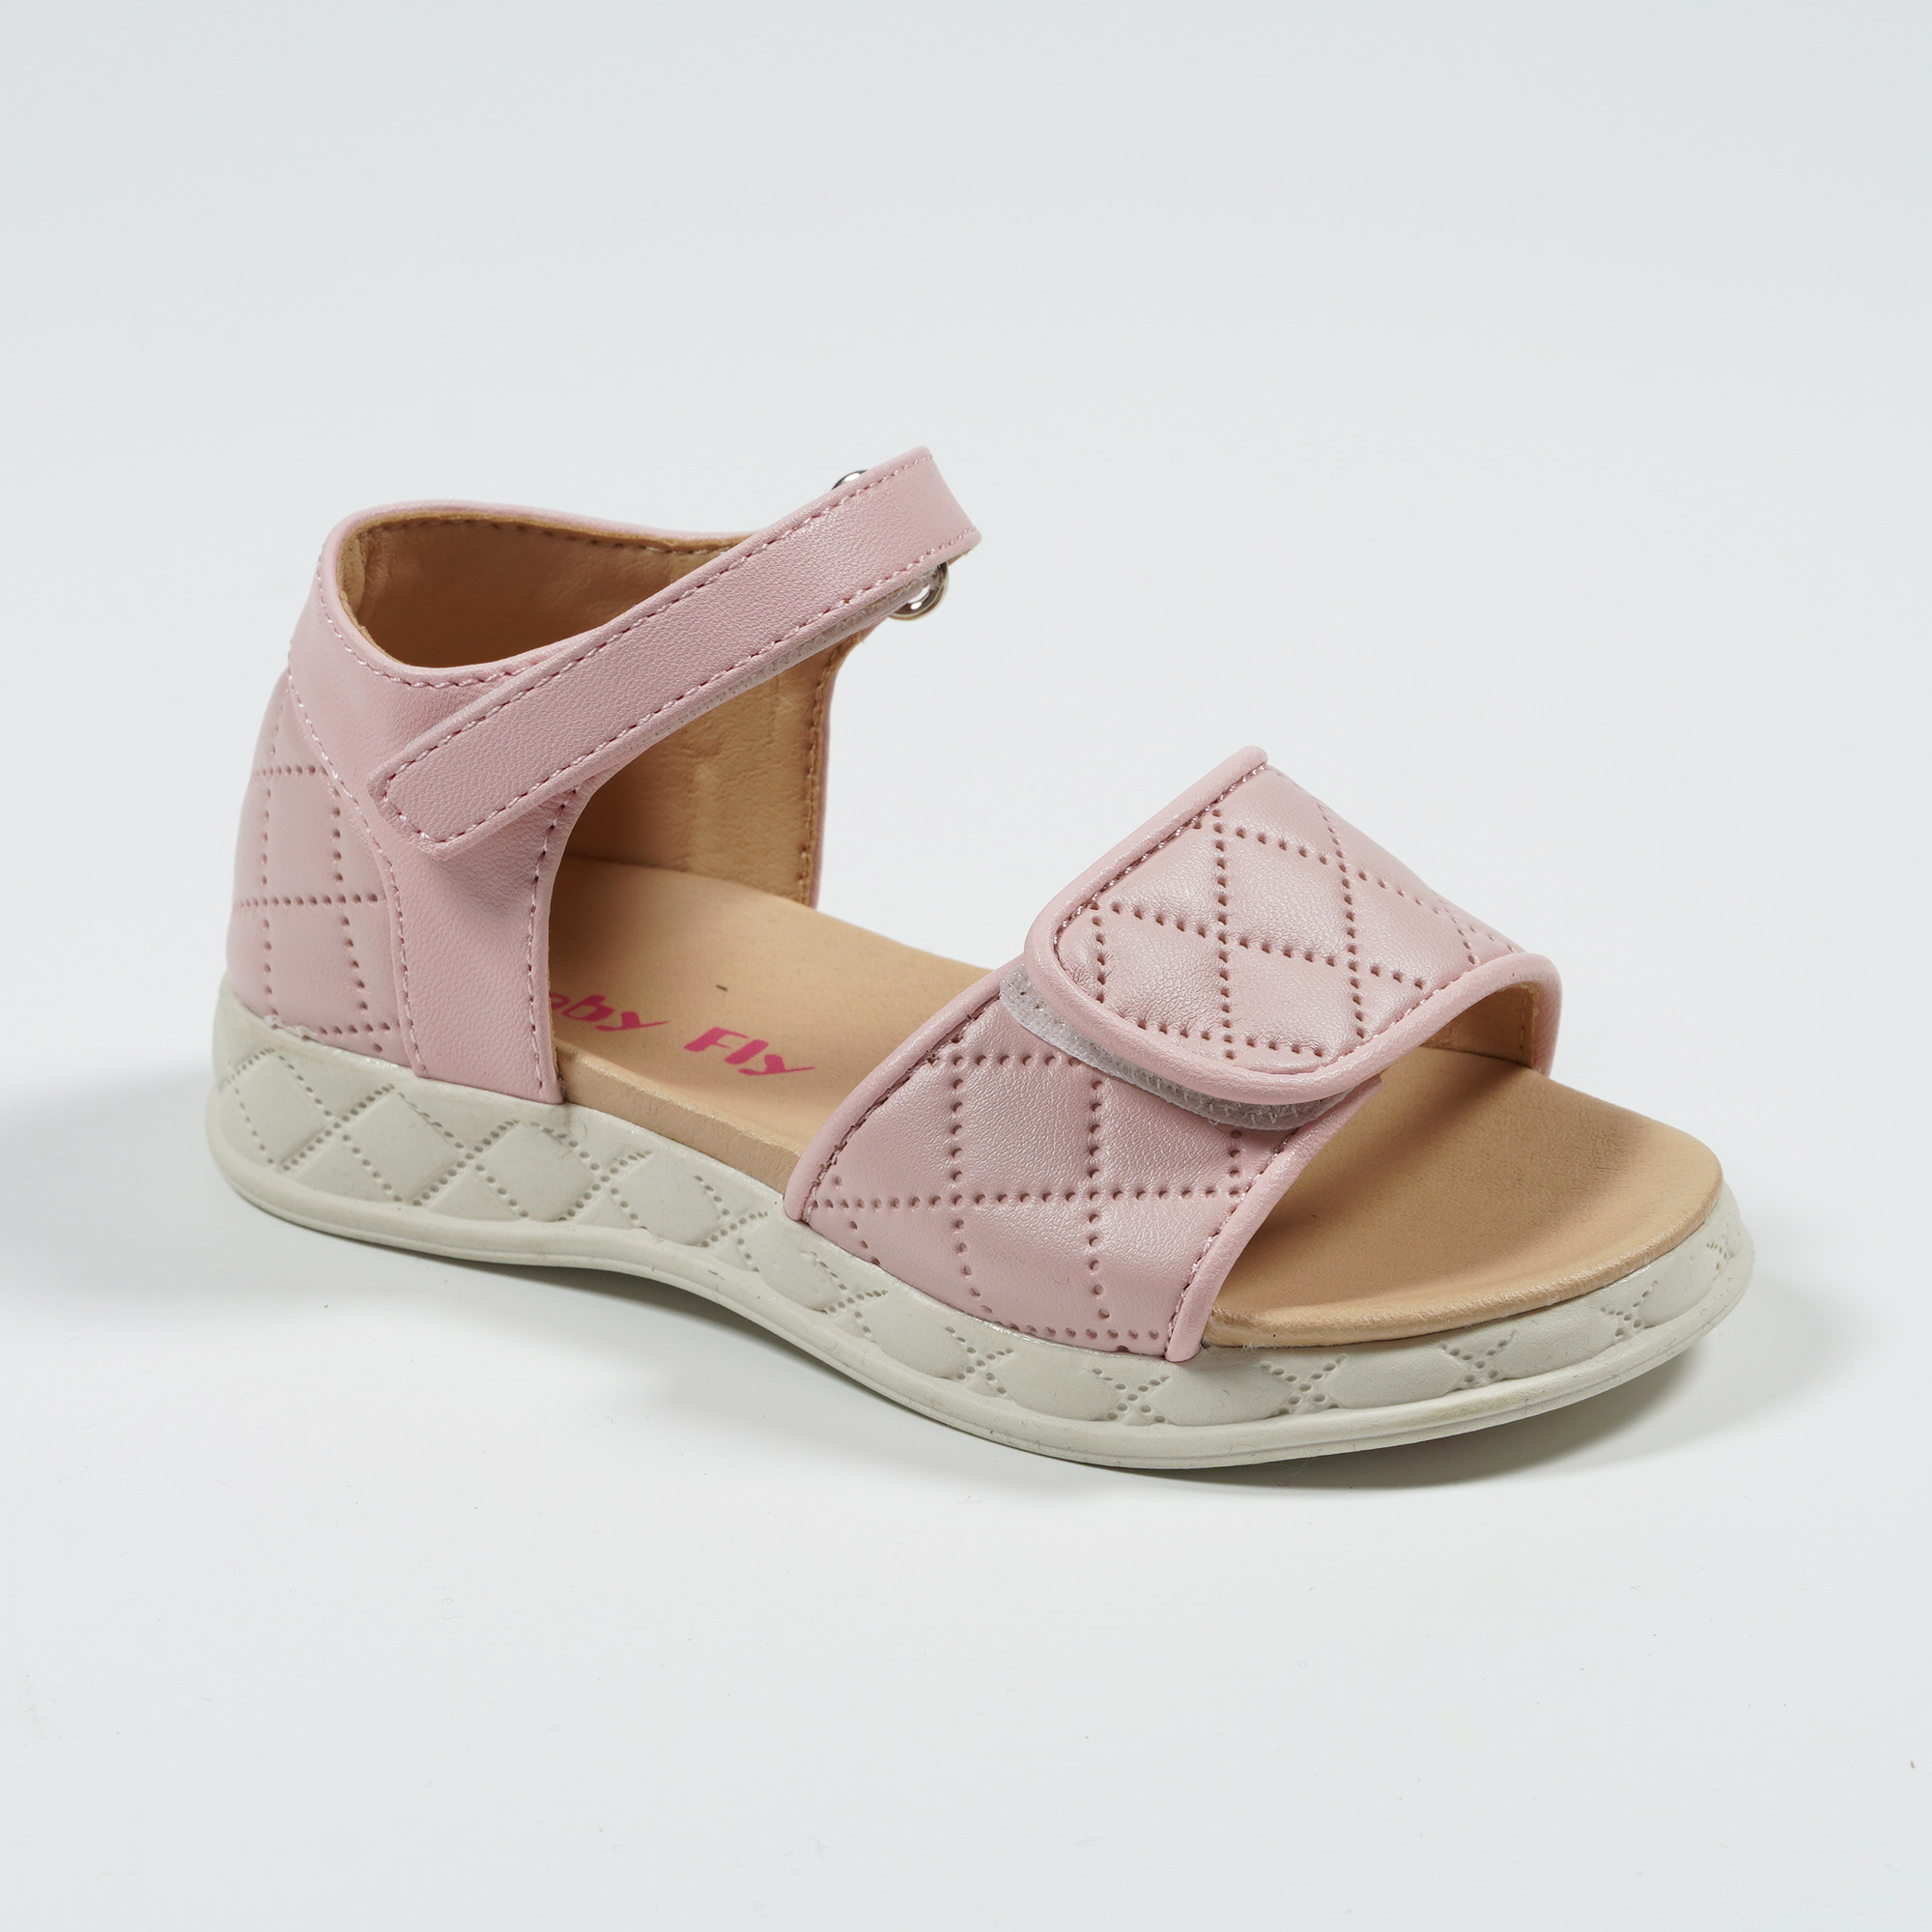 Nikoofly-2023-New-Arrivals-Plaid-Smbossed-Kids-Sandals-YDX9237-1-pink